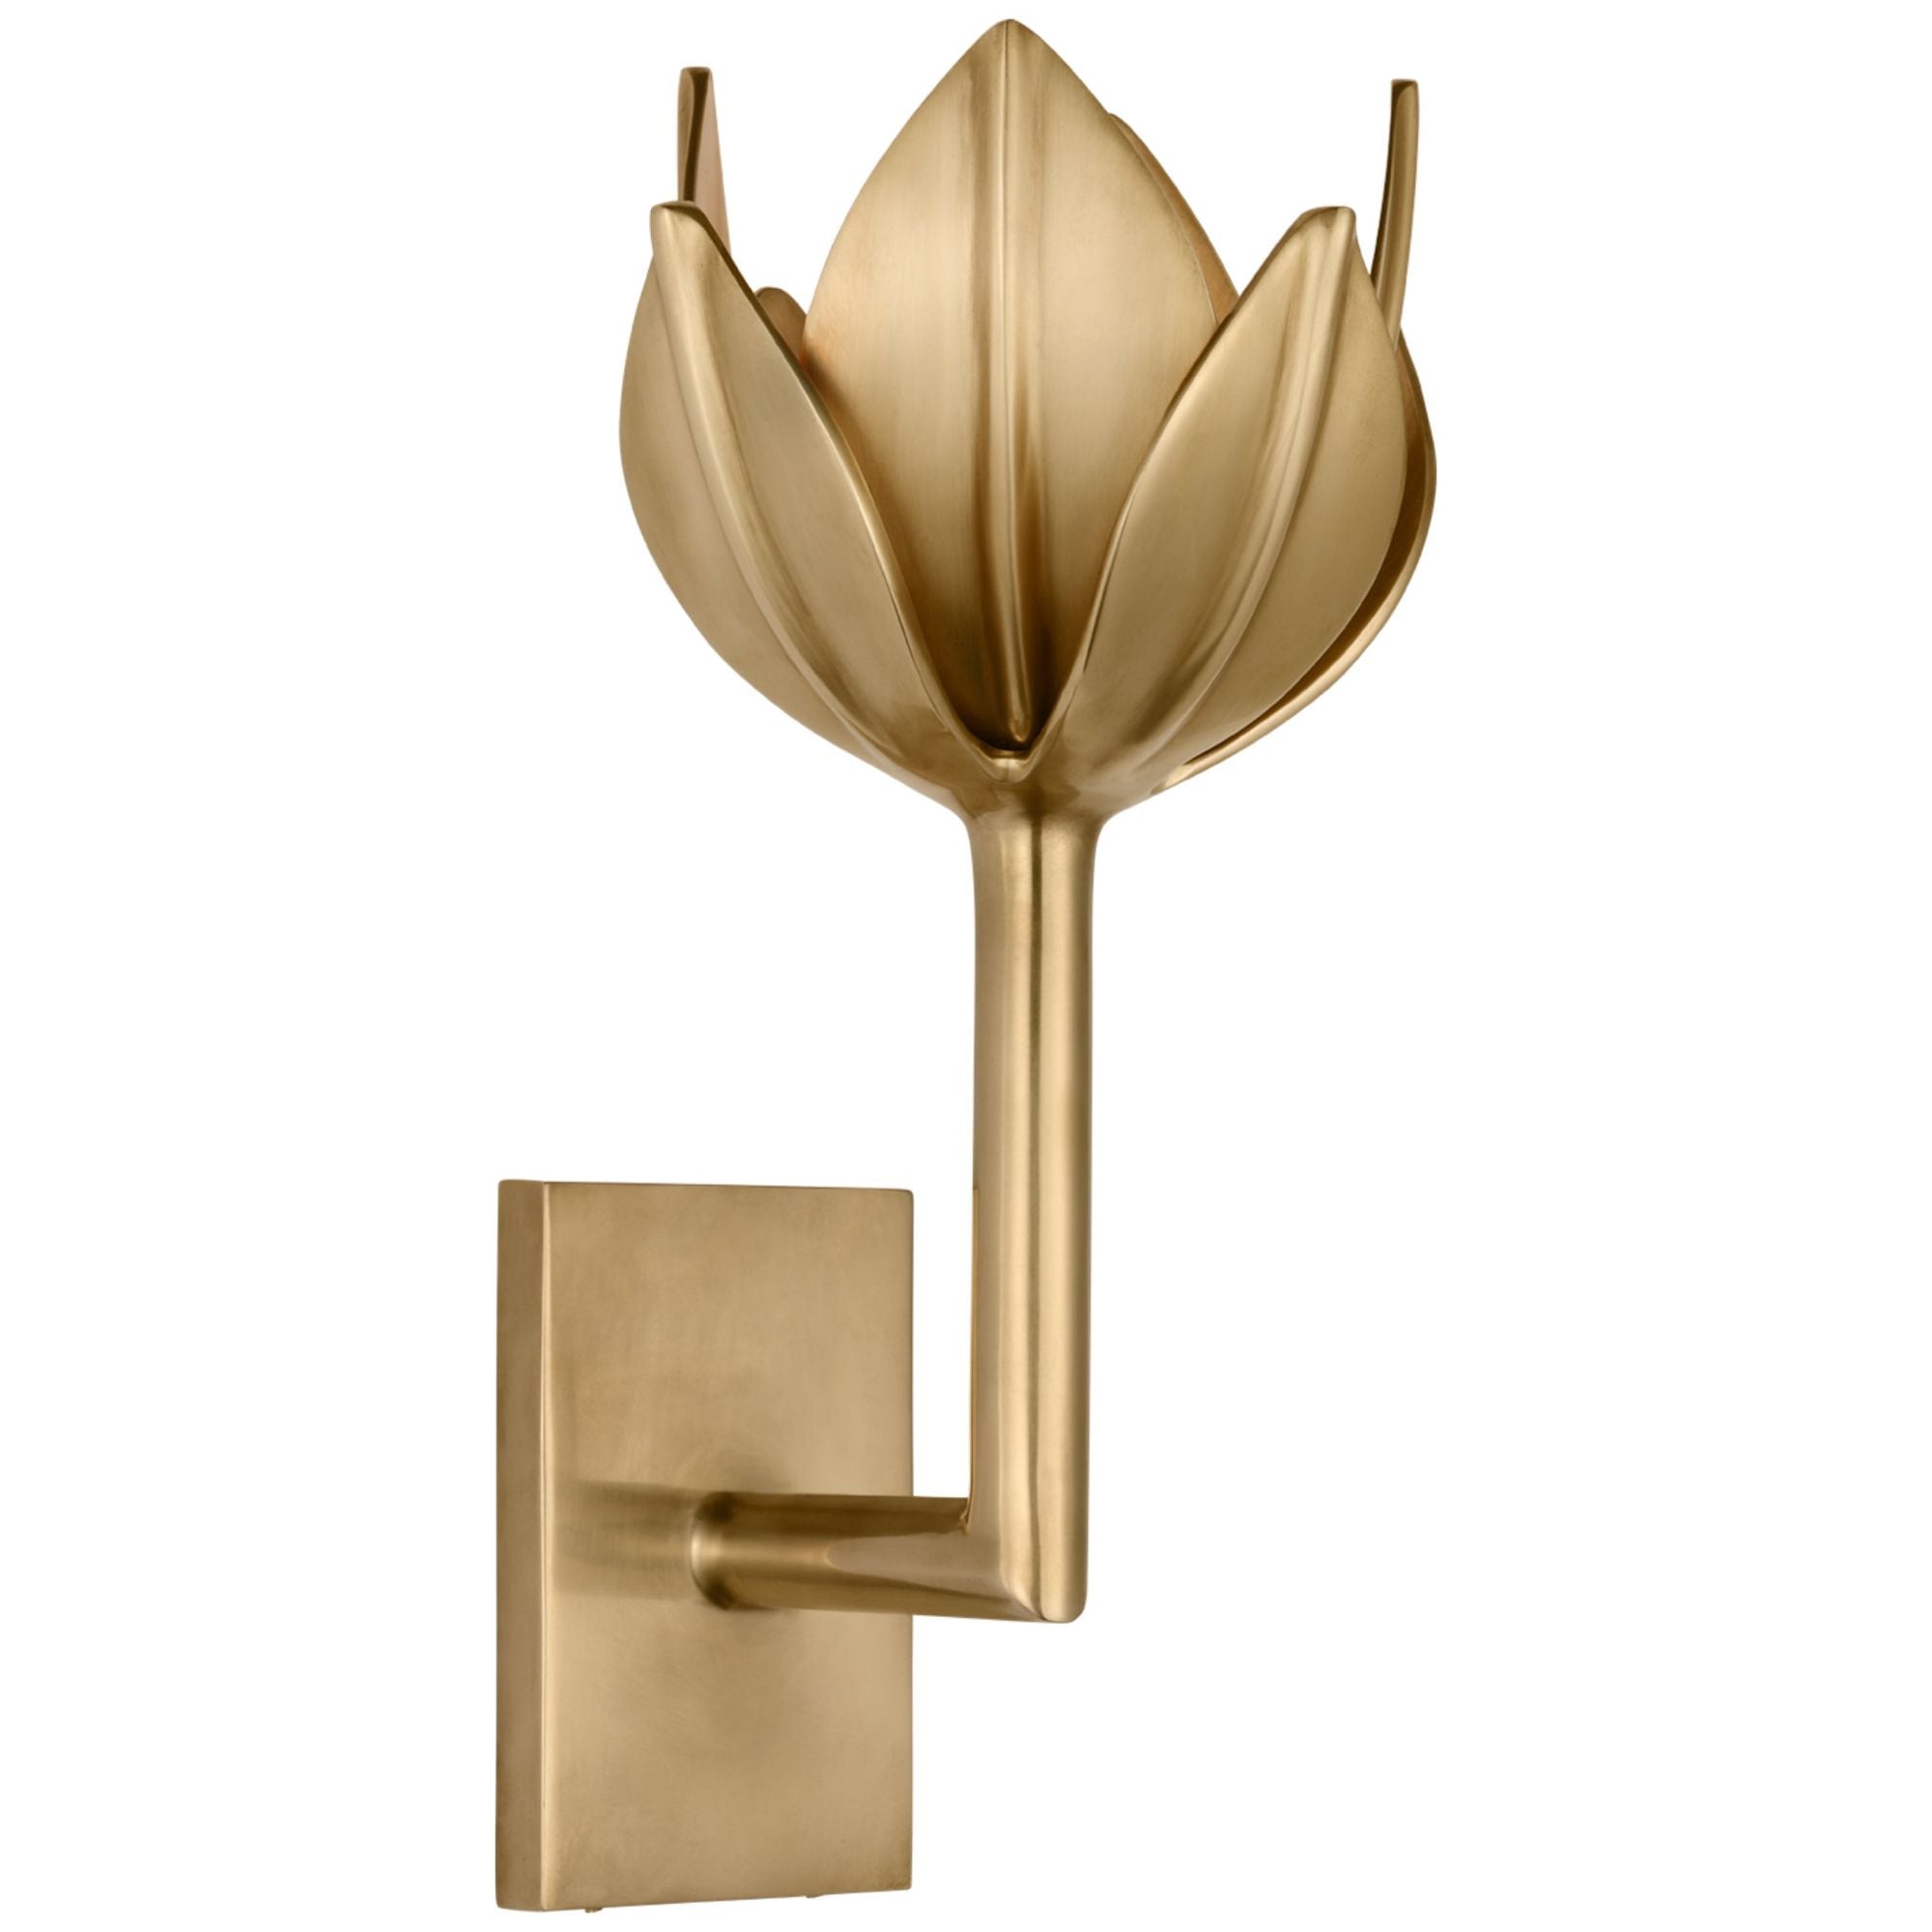 Julie Neill Alberto Small Sconce in Antique-Burnished Brass